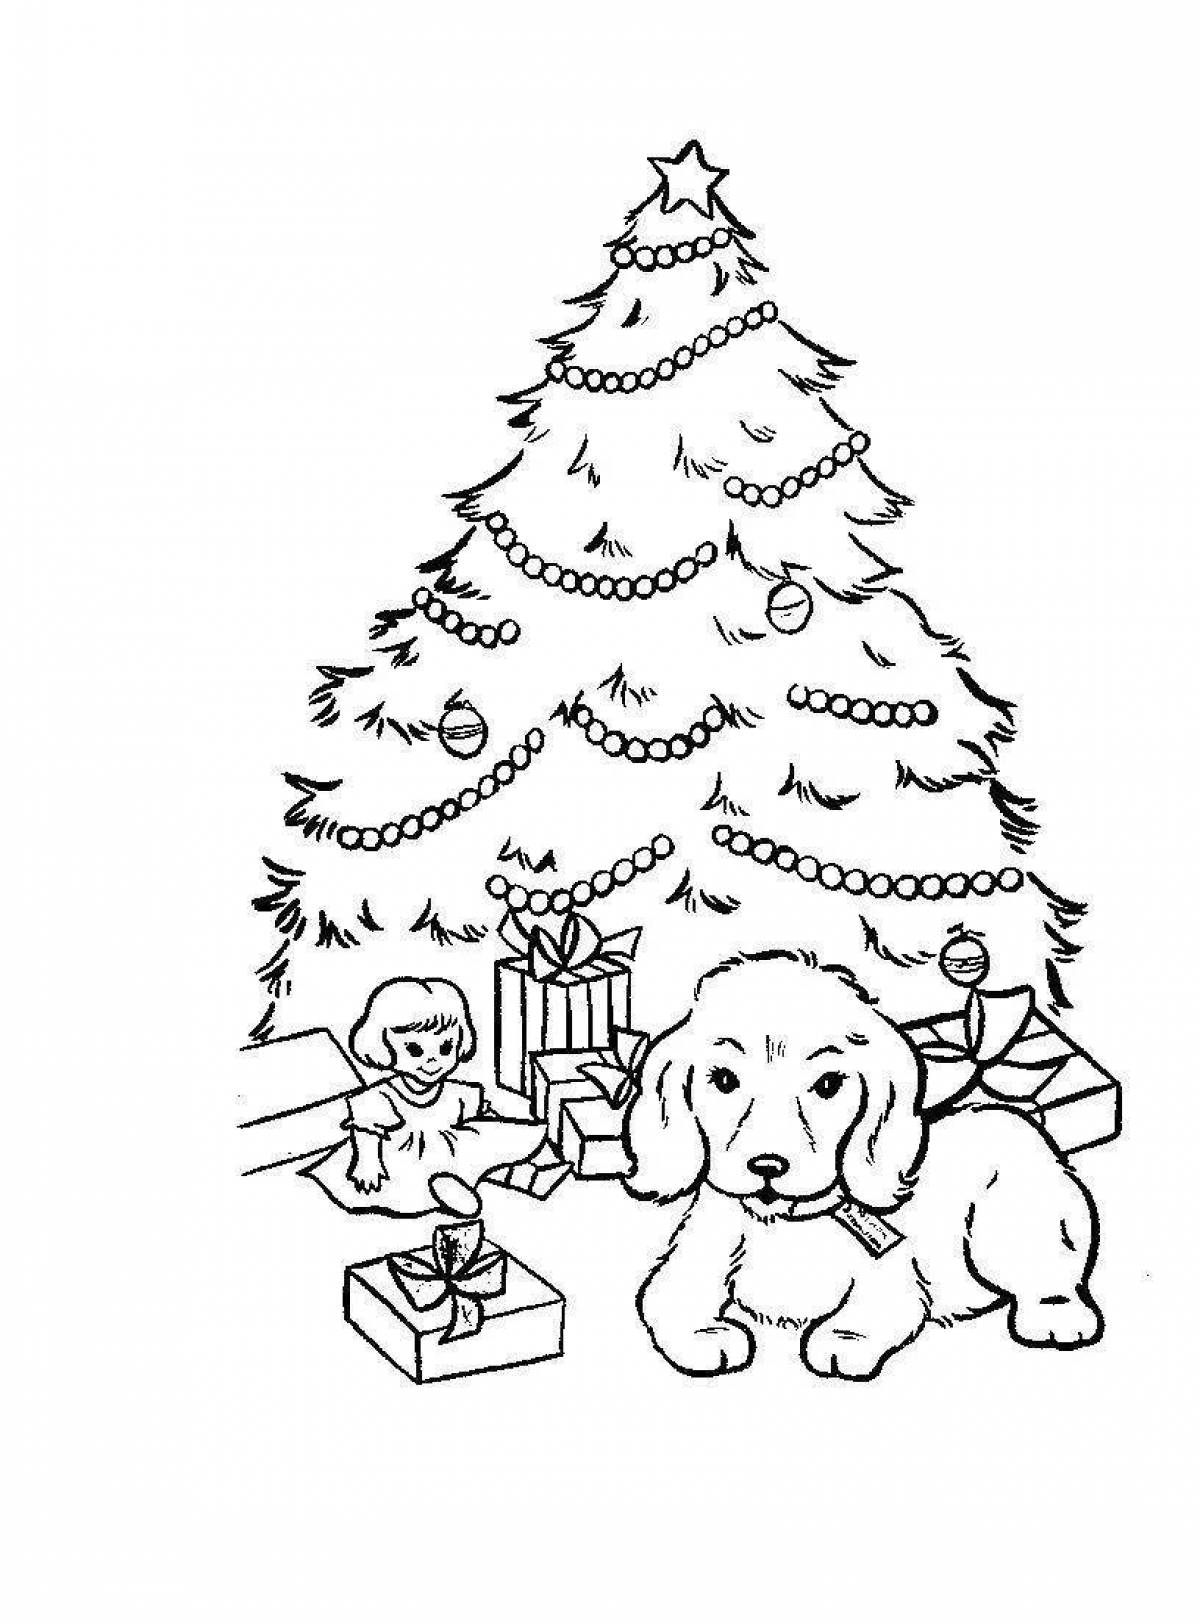 Glowing Christmas story coloring page